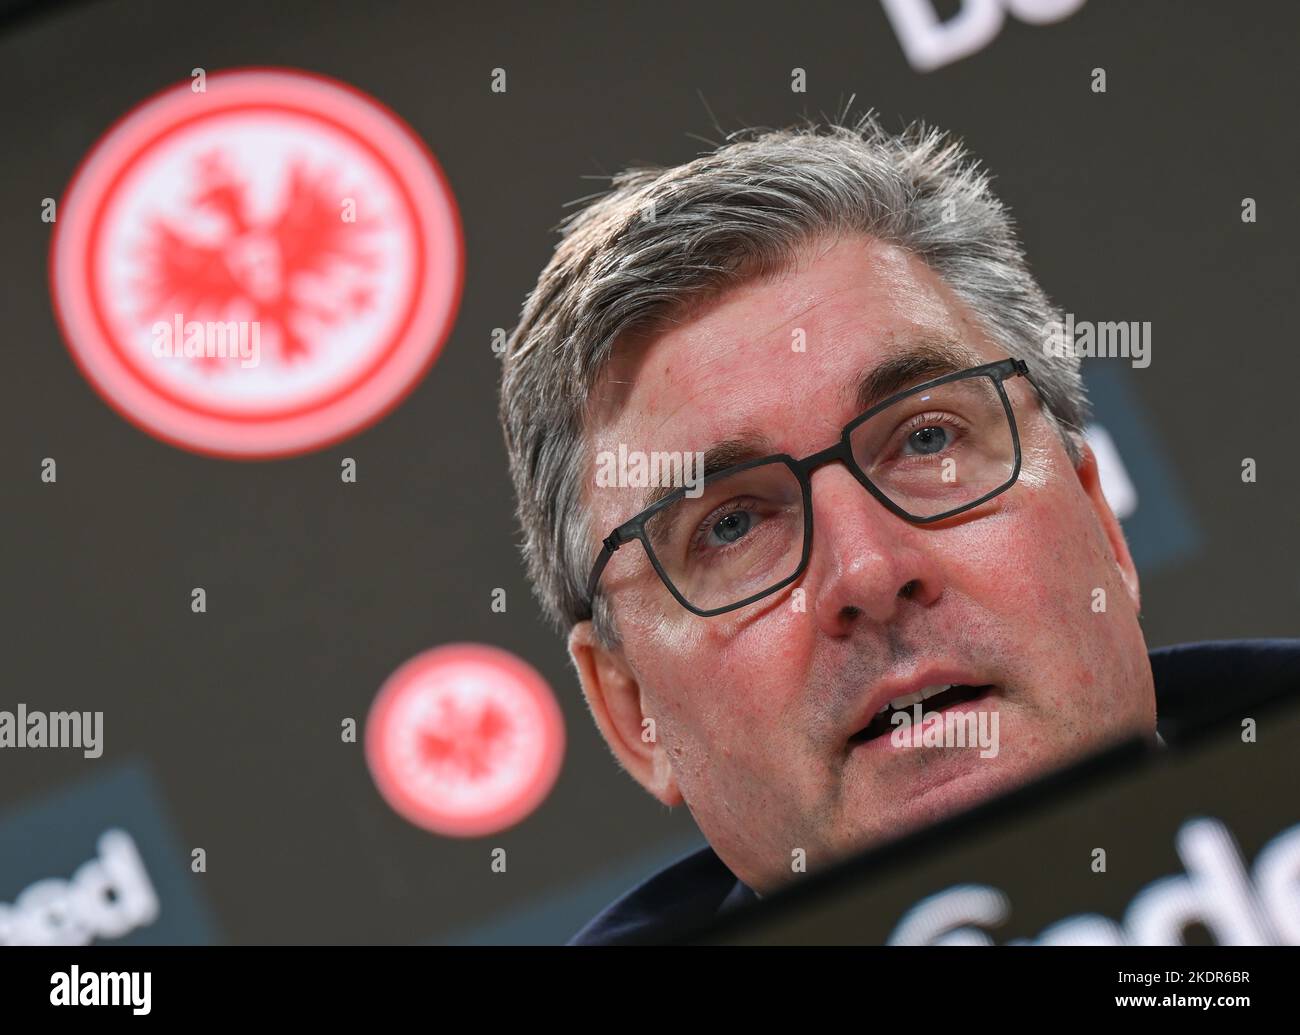 PRODUCTION - 08 November 2022, Hessen, Frankfurt/Main: Axel Hellmann, Spokesman of the Board of Eintracht Frankfurt Fußball AG, speaks during a press conference of Eintracht Frankfurt. Eintracht Frankfurt has extended the contract with its main sponsor Indeed until 2026. Photo: Arne Dedert/dpa Stock Photo